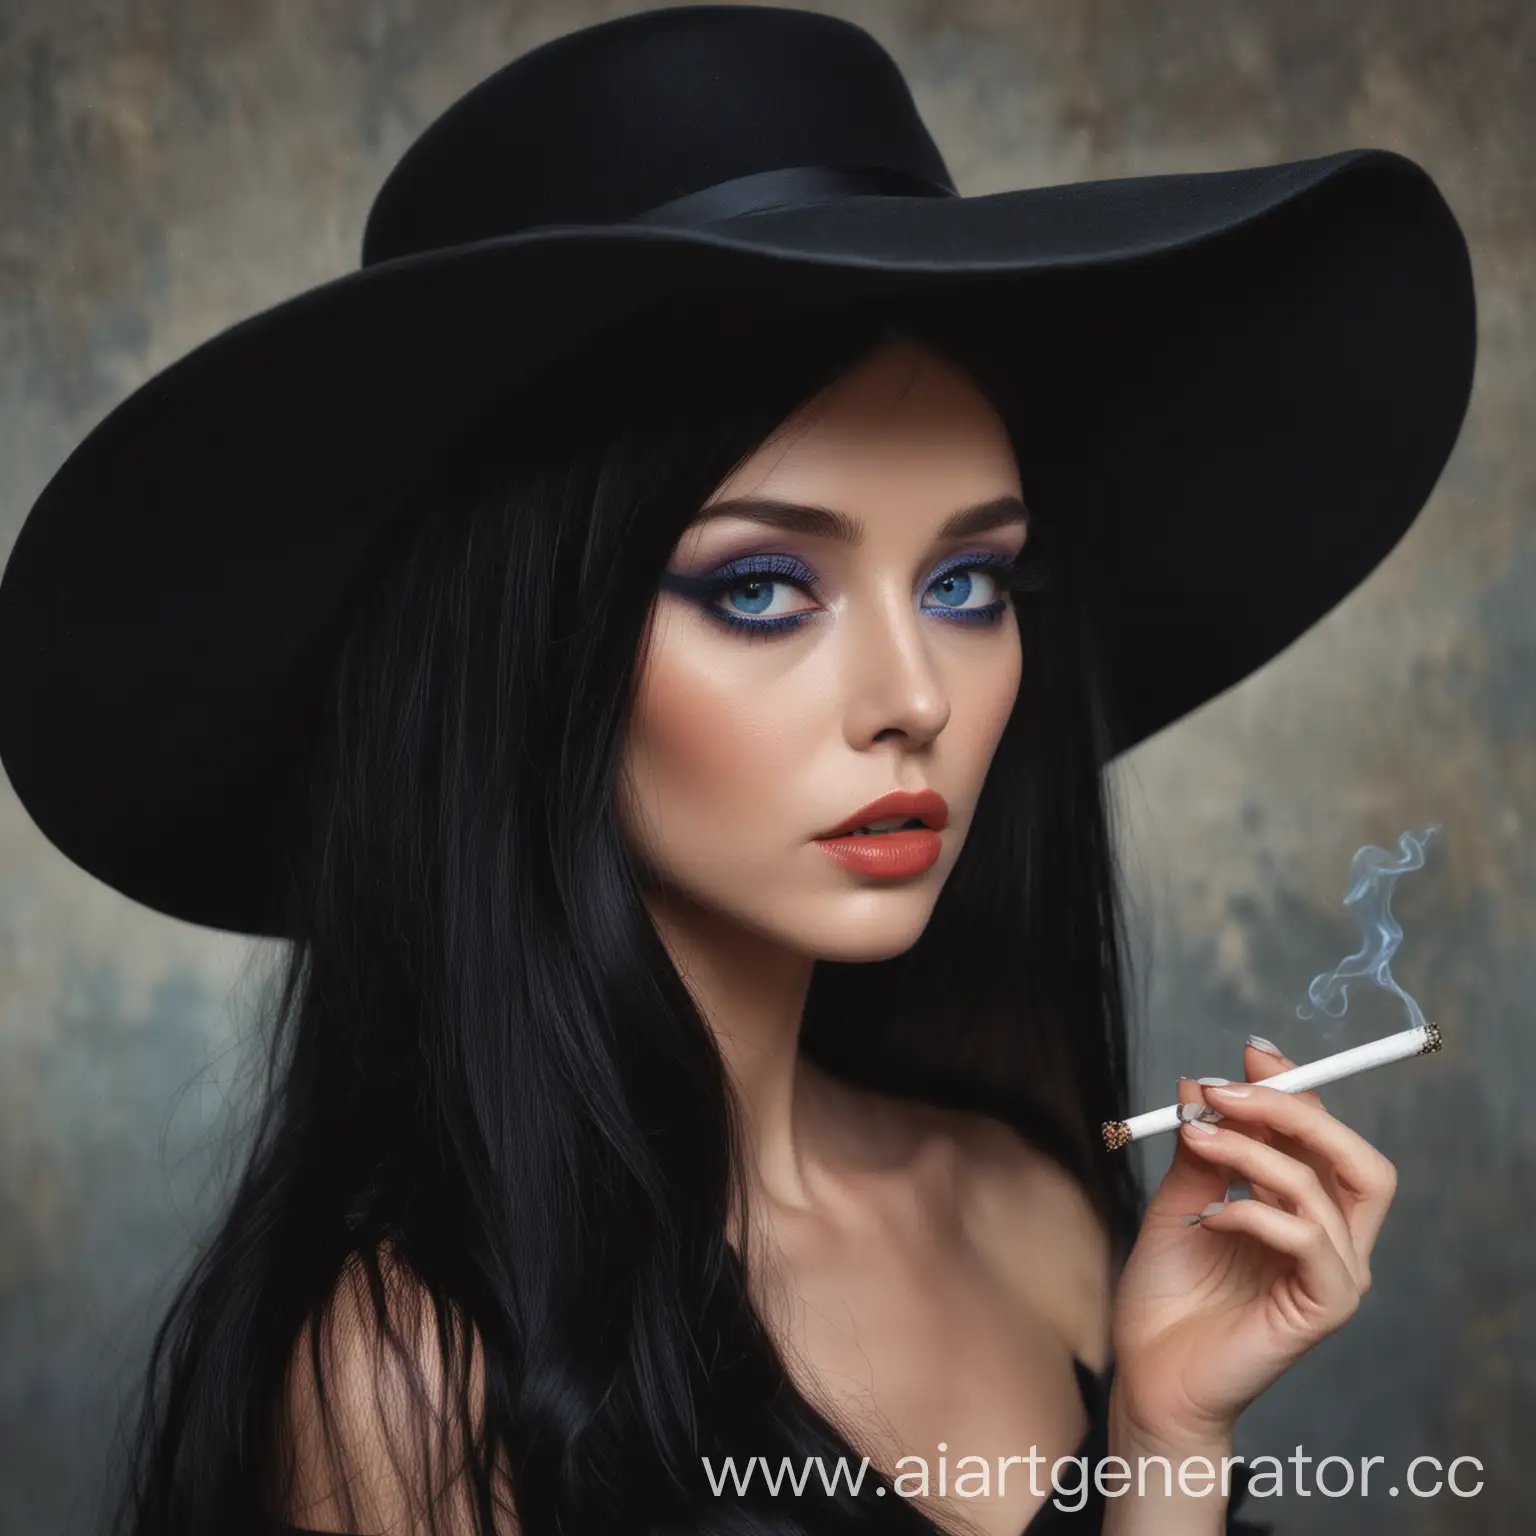 Elegant-Woman-in-Black-Evening-Dress-with-Cigarette